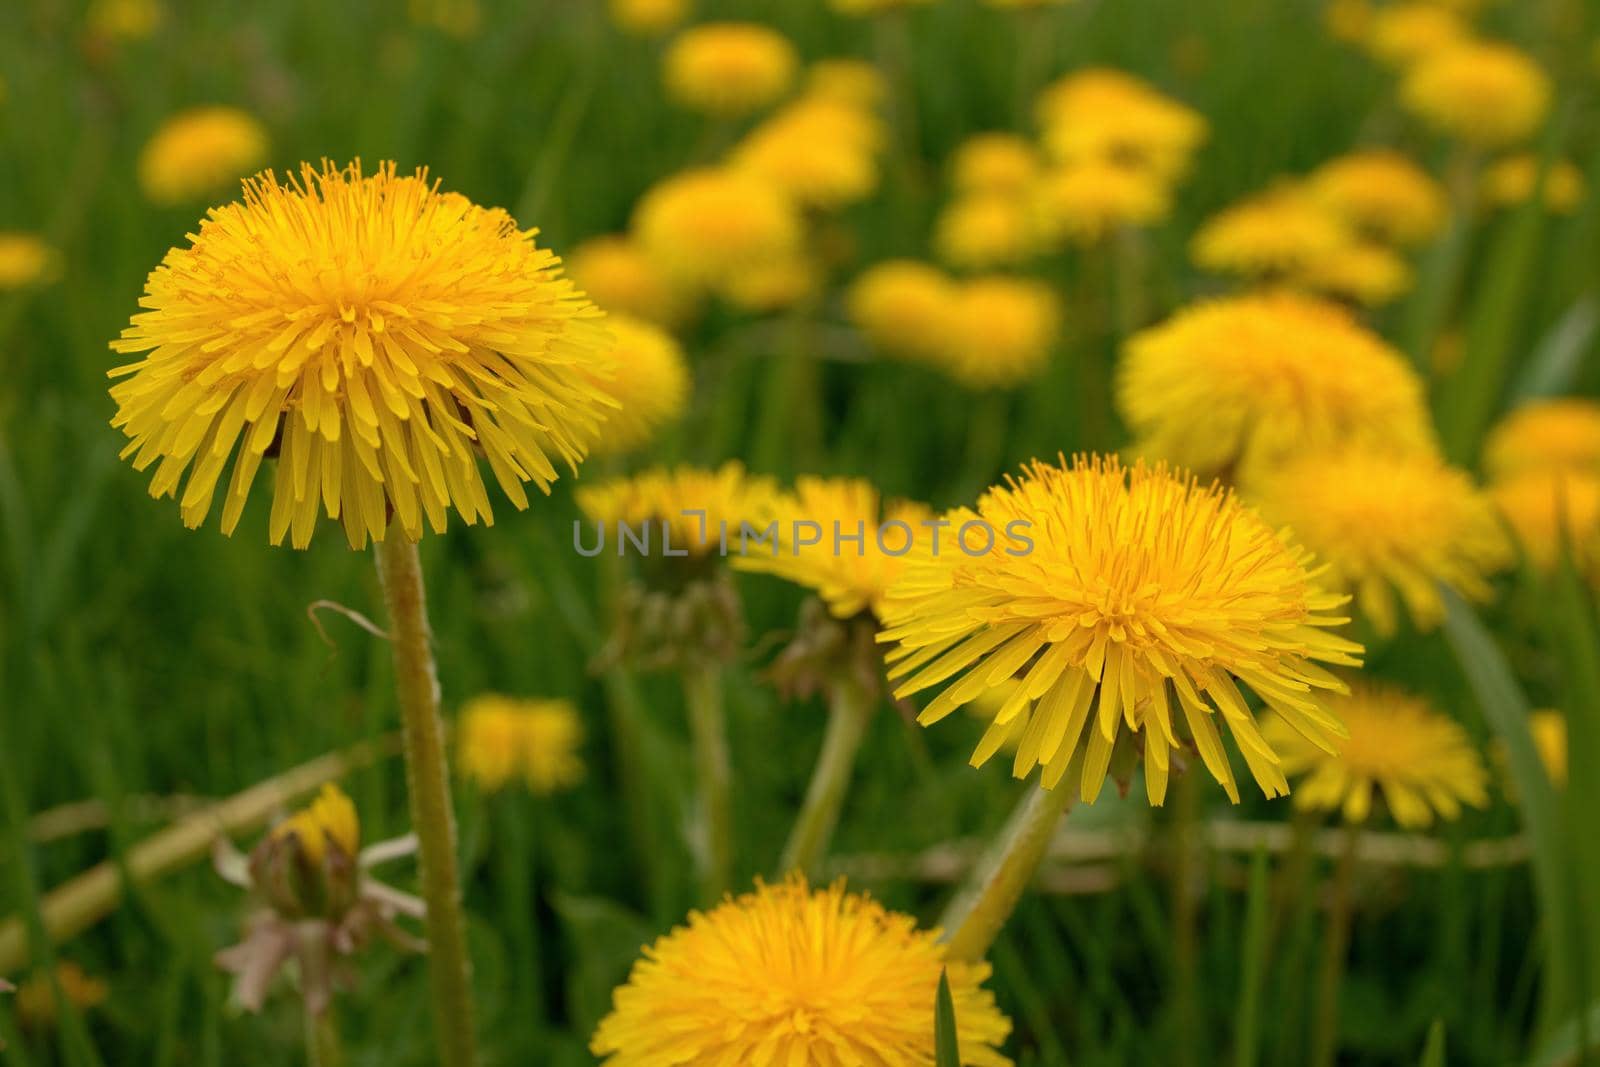 Low angle Close up of Dandelion Flowers or Weeds Growing in Grass in Spring by markvandam